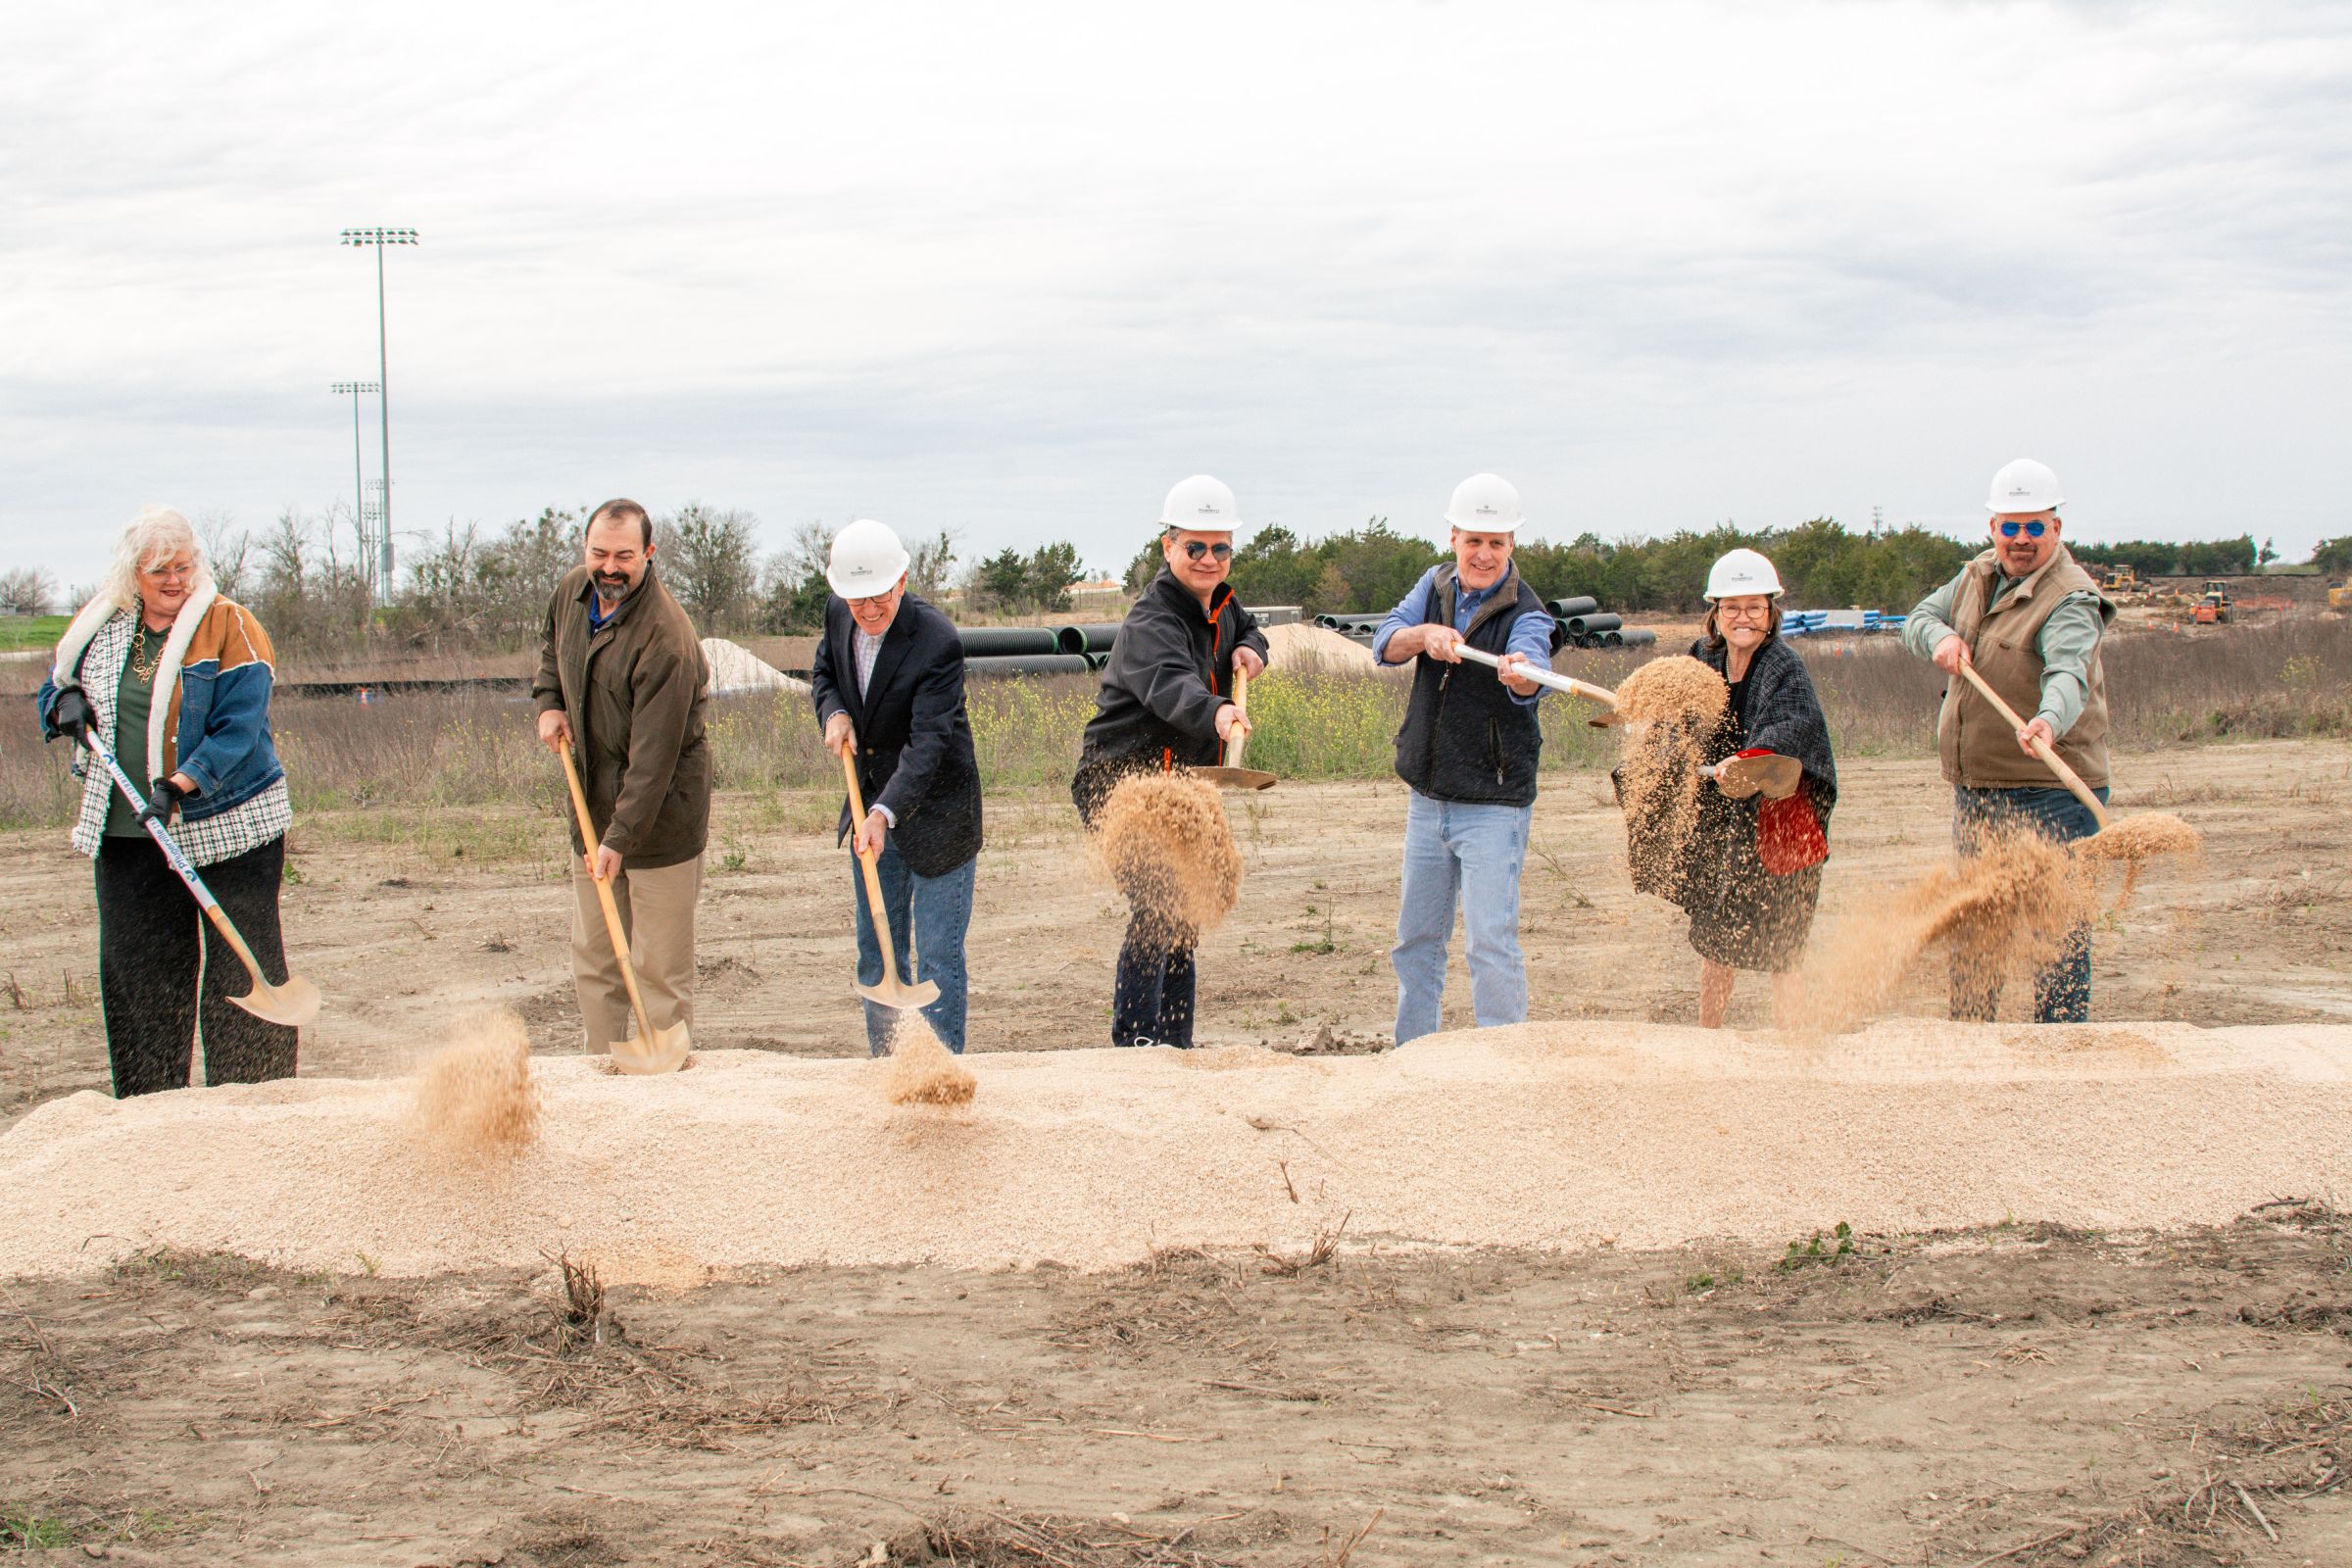 PRECISION METAL FABRICATION LEADER BREAKS GROUND ON STATE-OF-THE-ART MANUFACTURING FACILITY IN PFLUGERVILLE’S ONE THIRTY BUSINESS PARK Photo